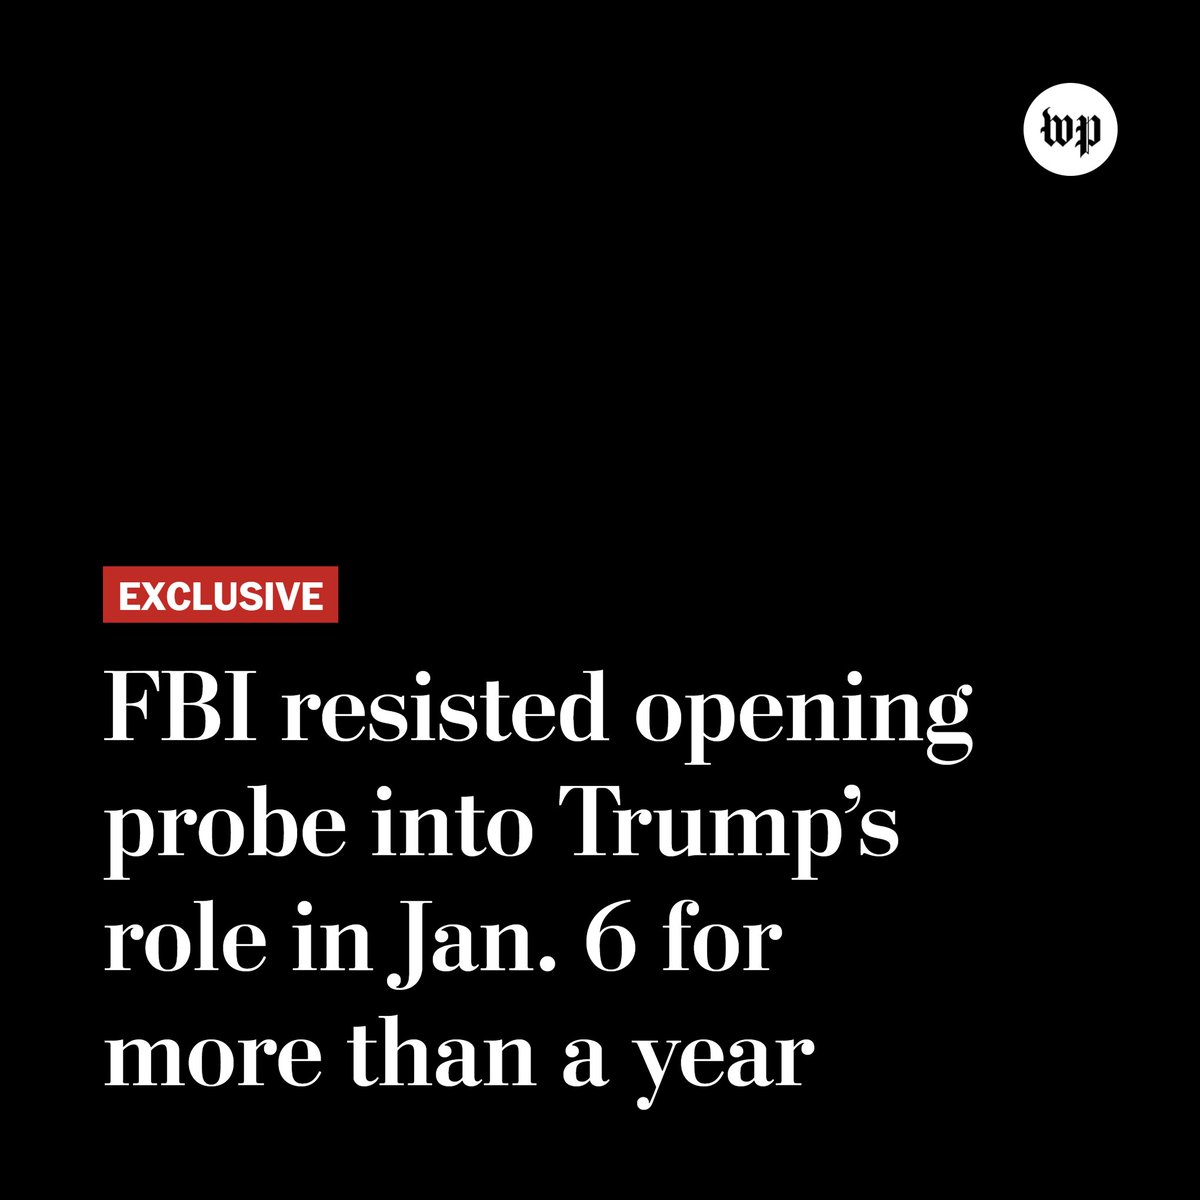 Exclusive: A Washington Post investigation found that more than a year would pass before prosecutors and FBI agents jointly embarked on a formal probe of actions directed from the White House to try to steal the election. Even then, the FBI stopped short of identifying the